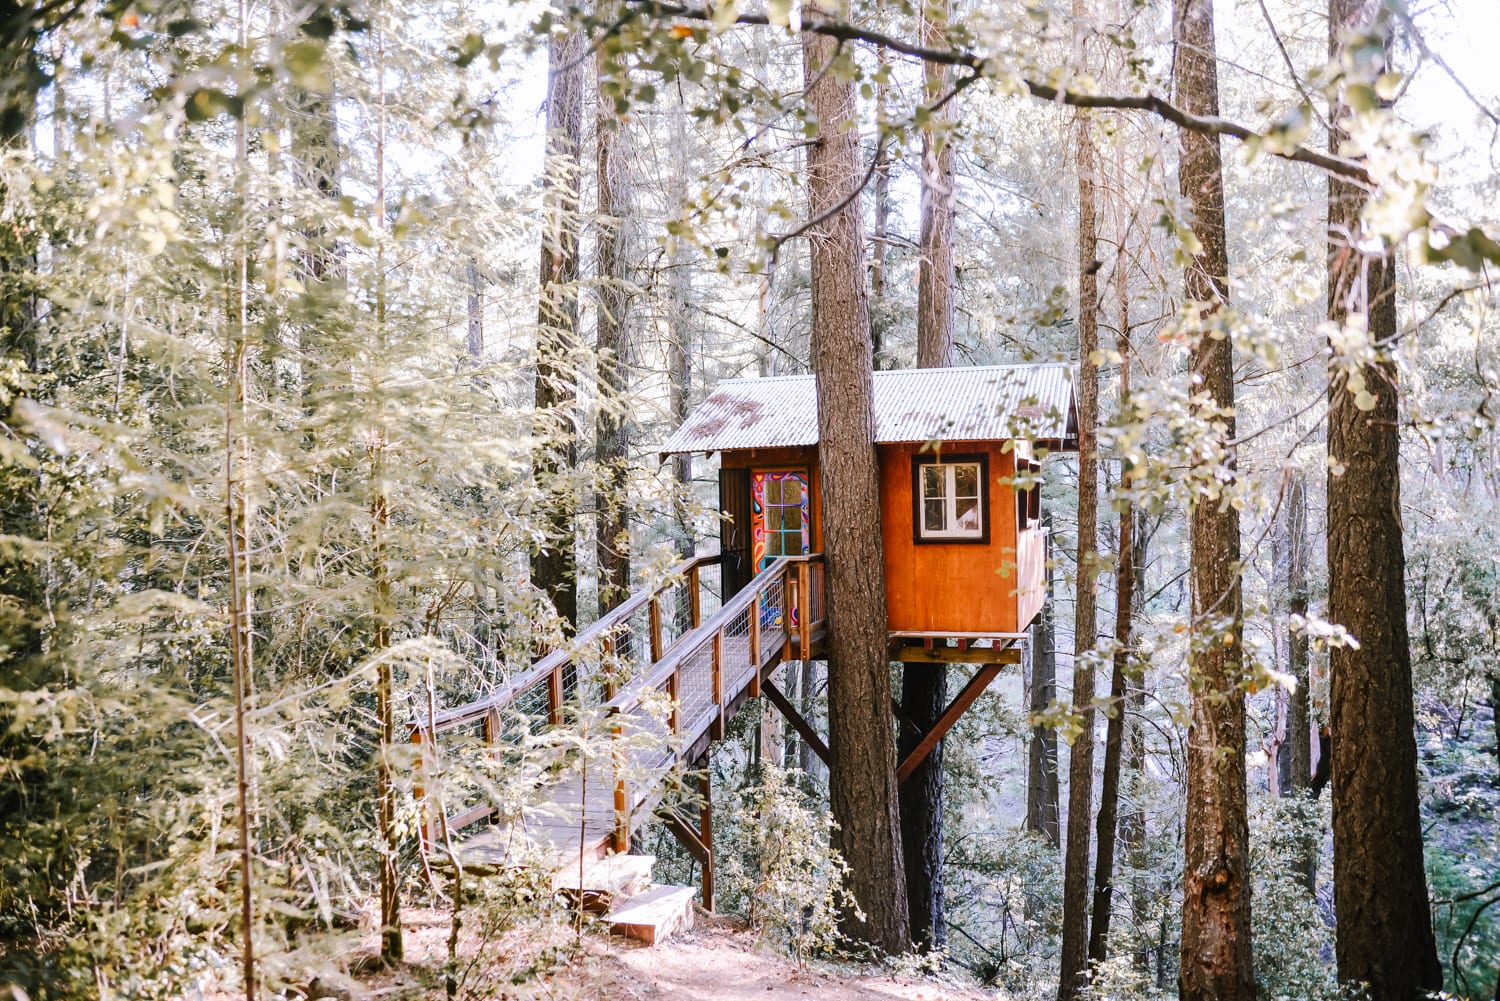 The beautiful treehouse upon arrival